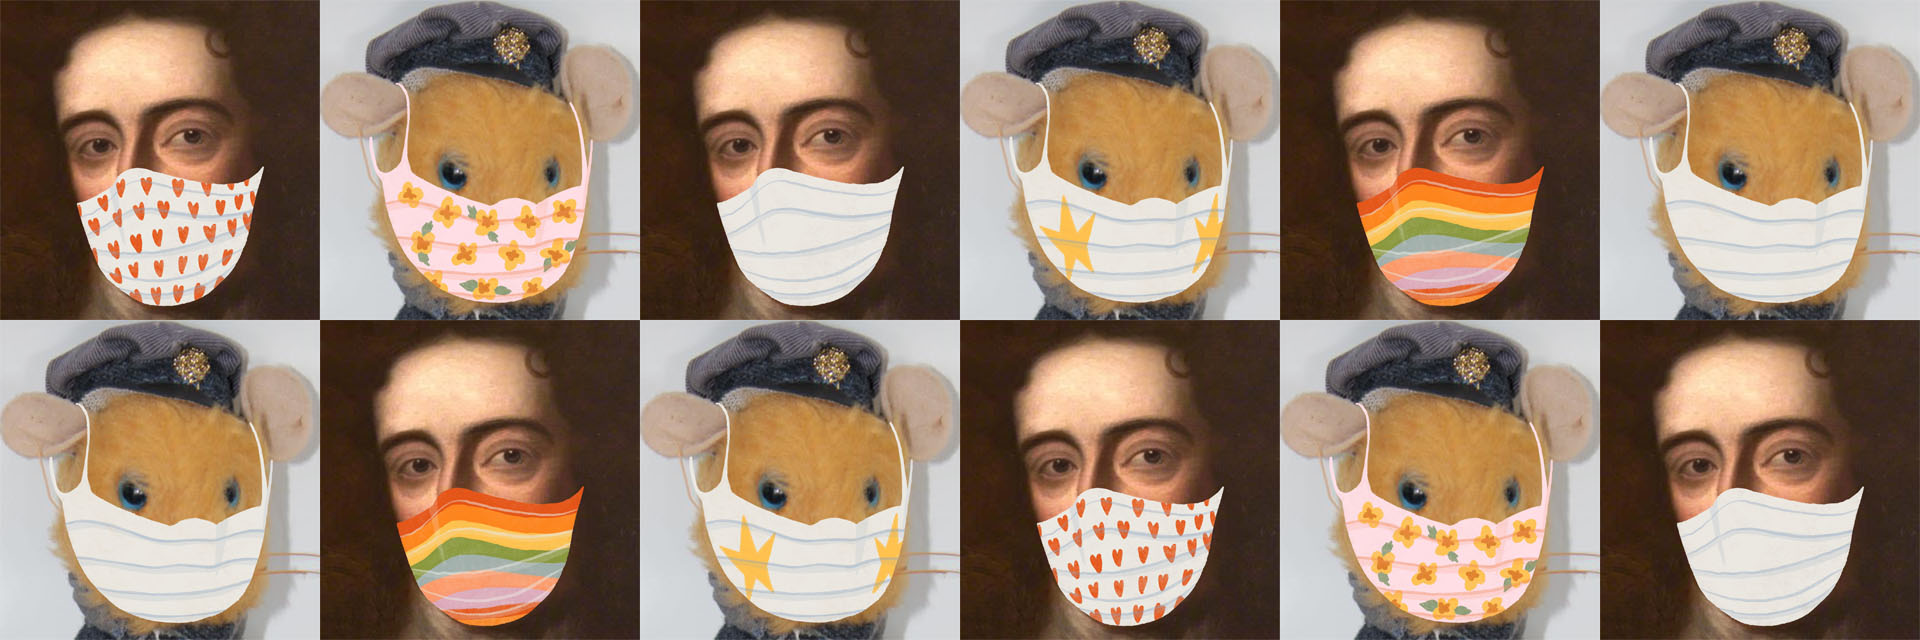 Radar Rat and William III from the BHM collection - artwork by Effie Peters: see instagram.com/linesbyeff